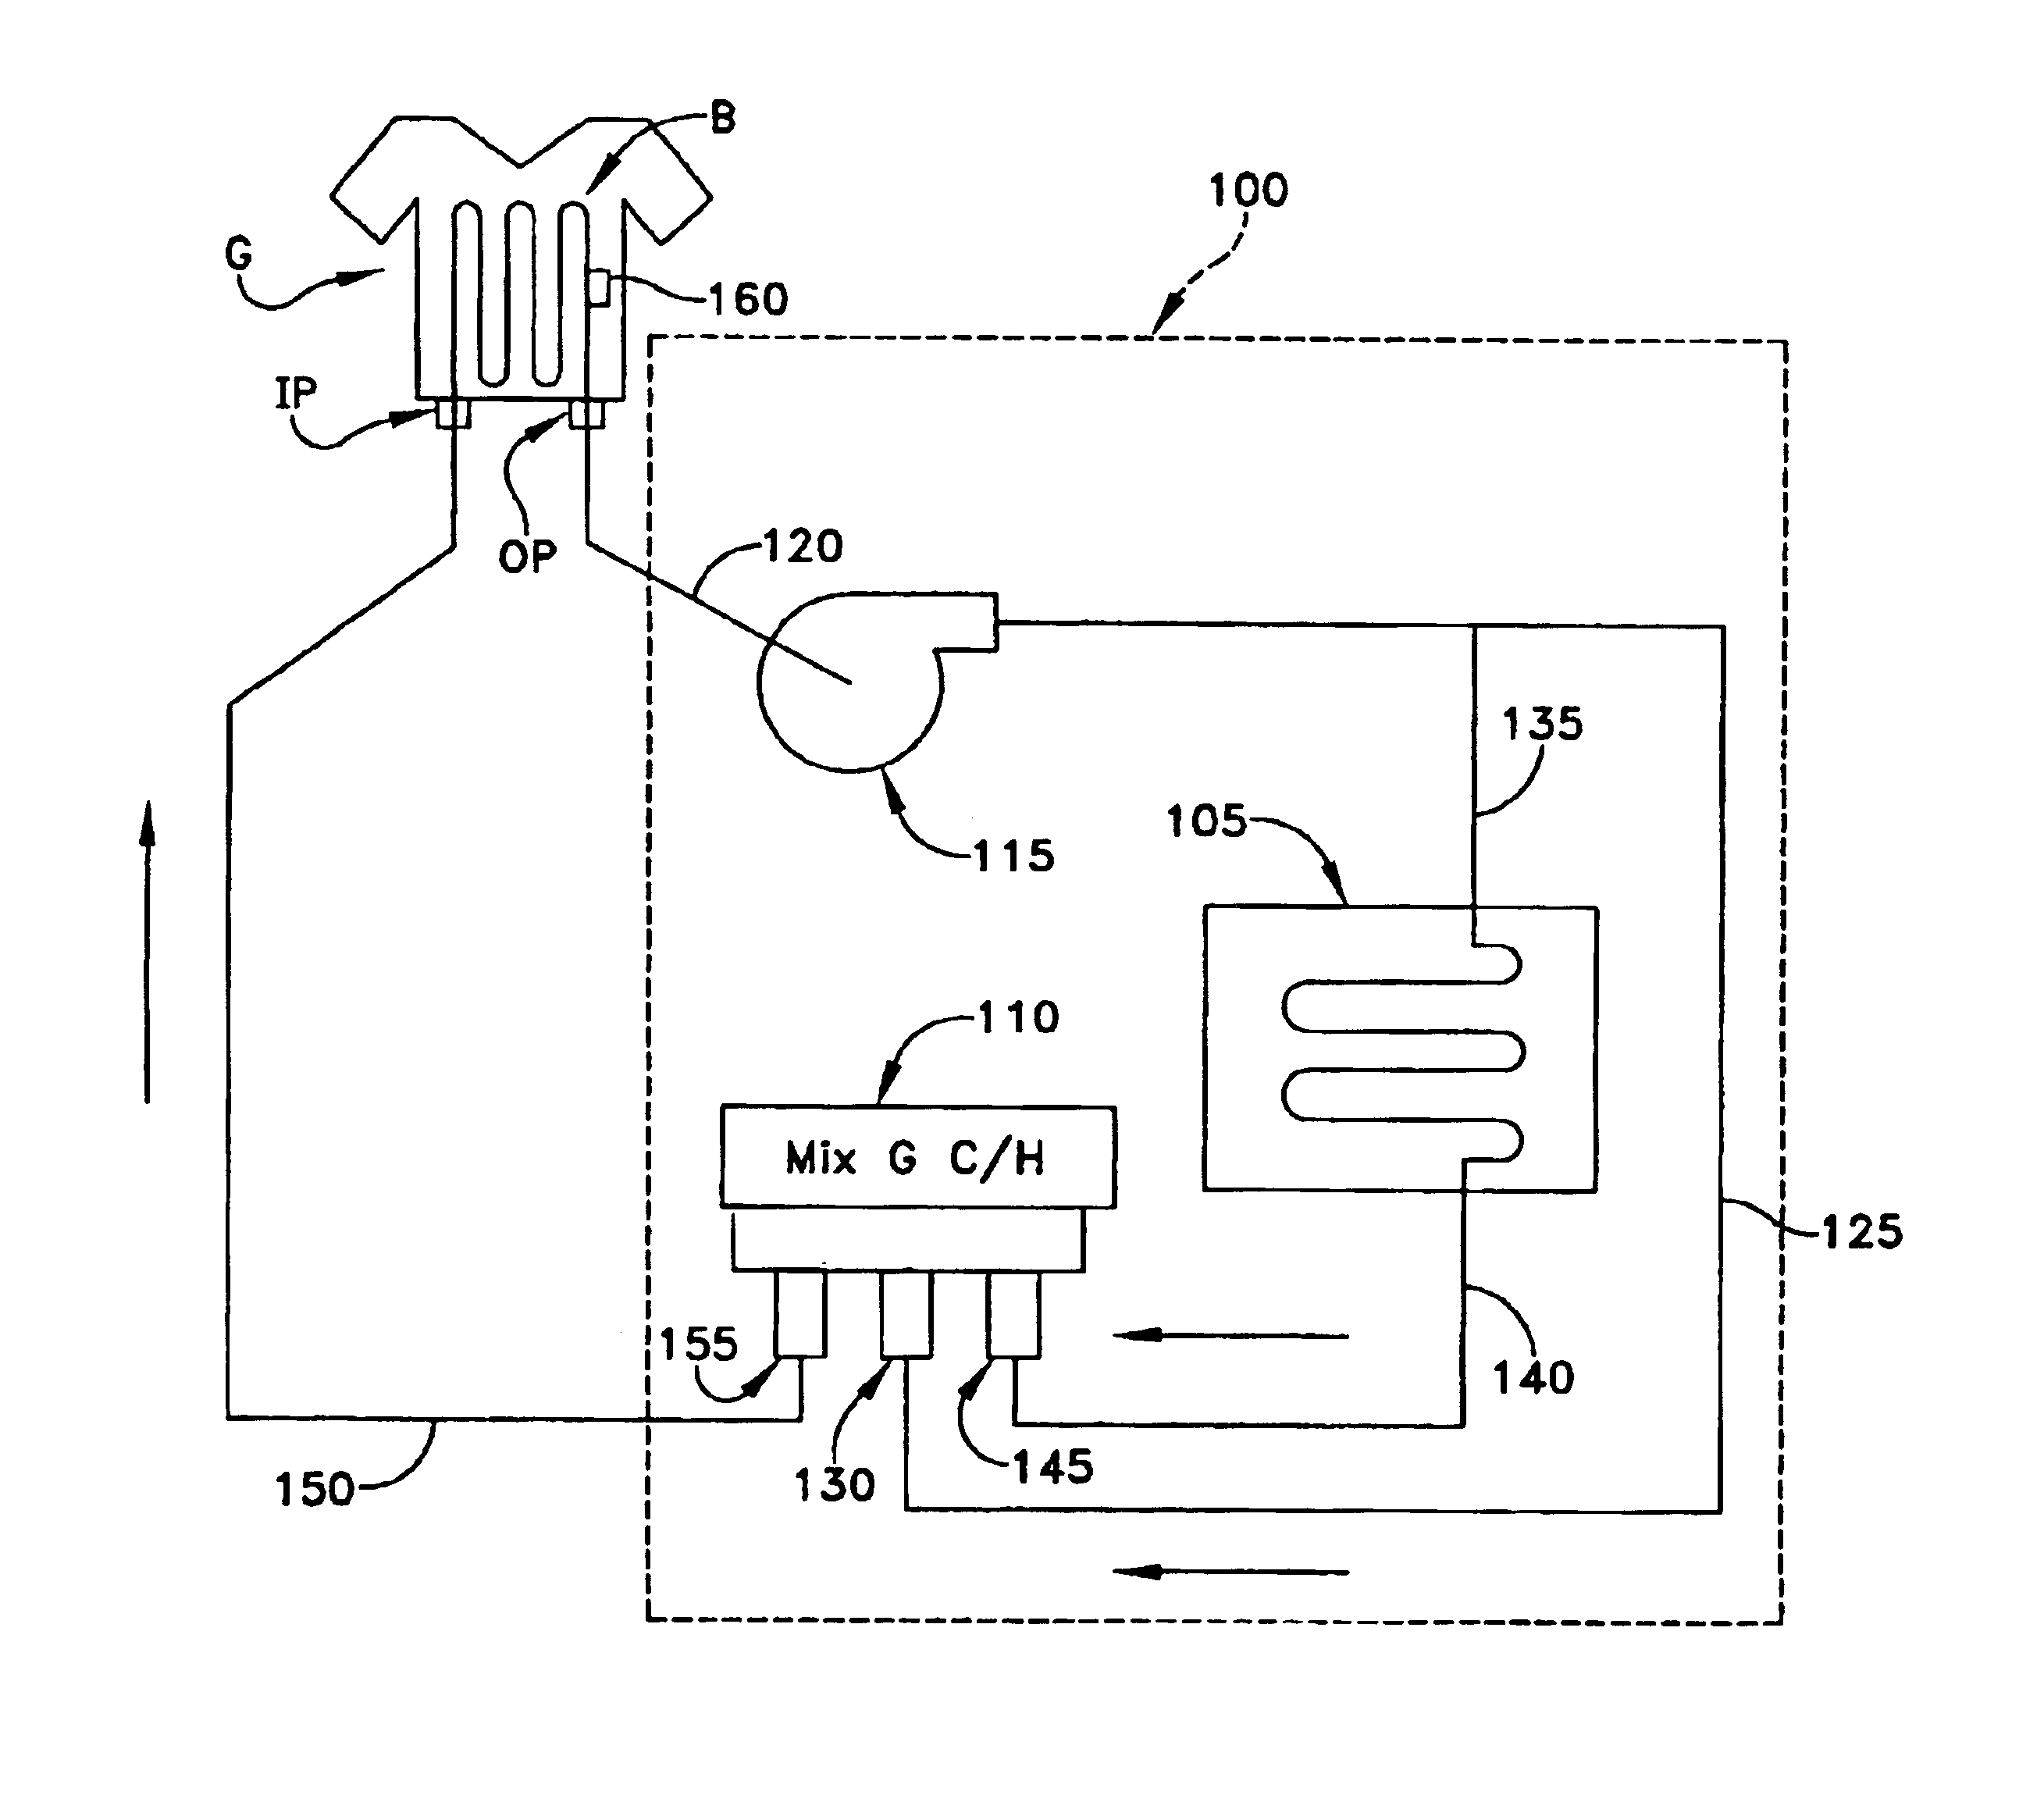 Personal cooling or warming system using closed loop fluid flow